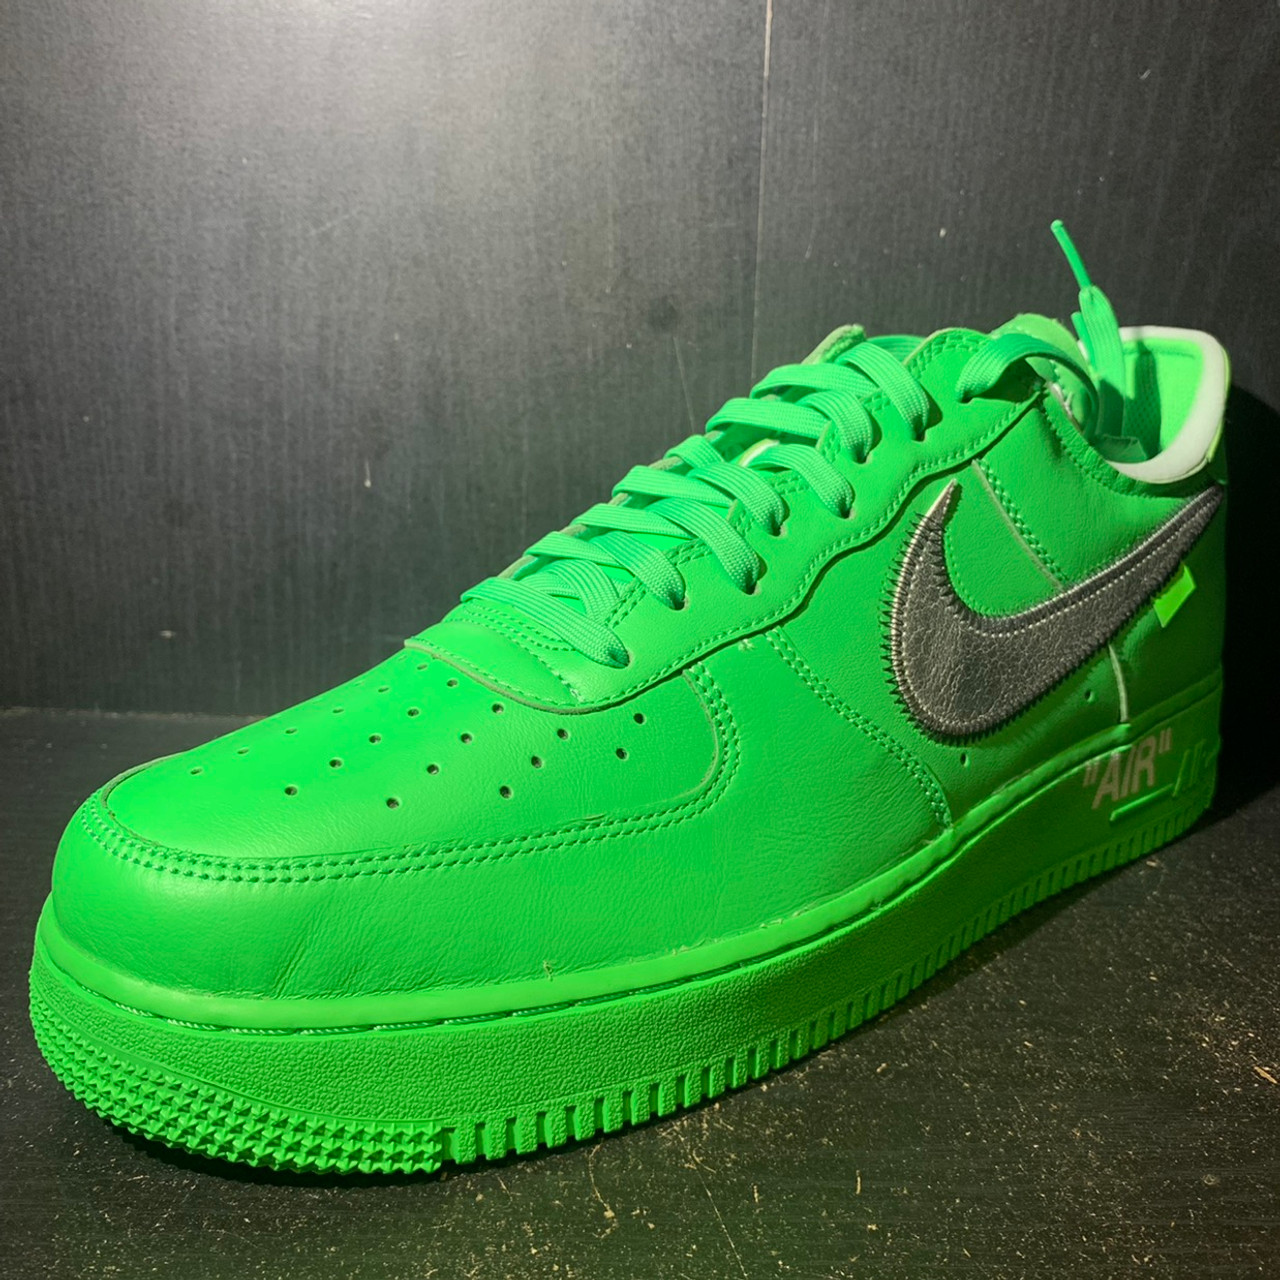 The Off-White Nike Air Force 1 Low Brooklyn Is The Best Sneaker To